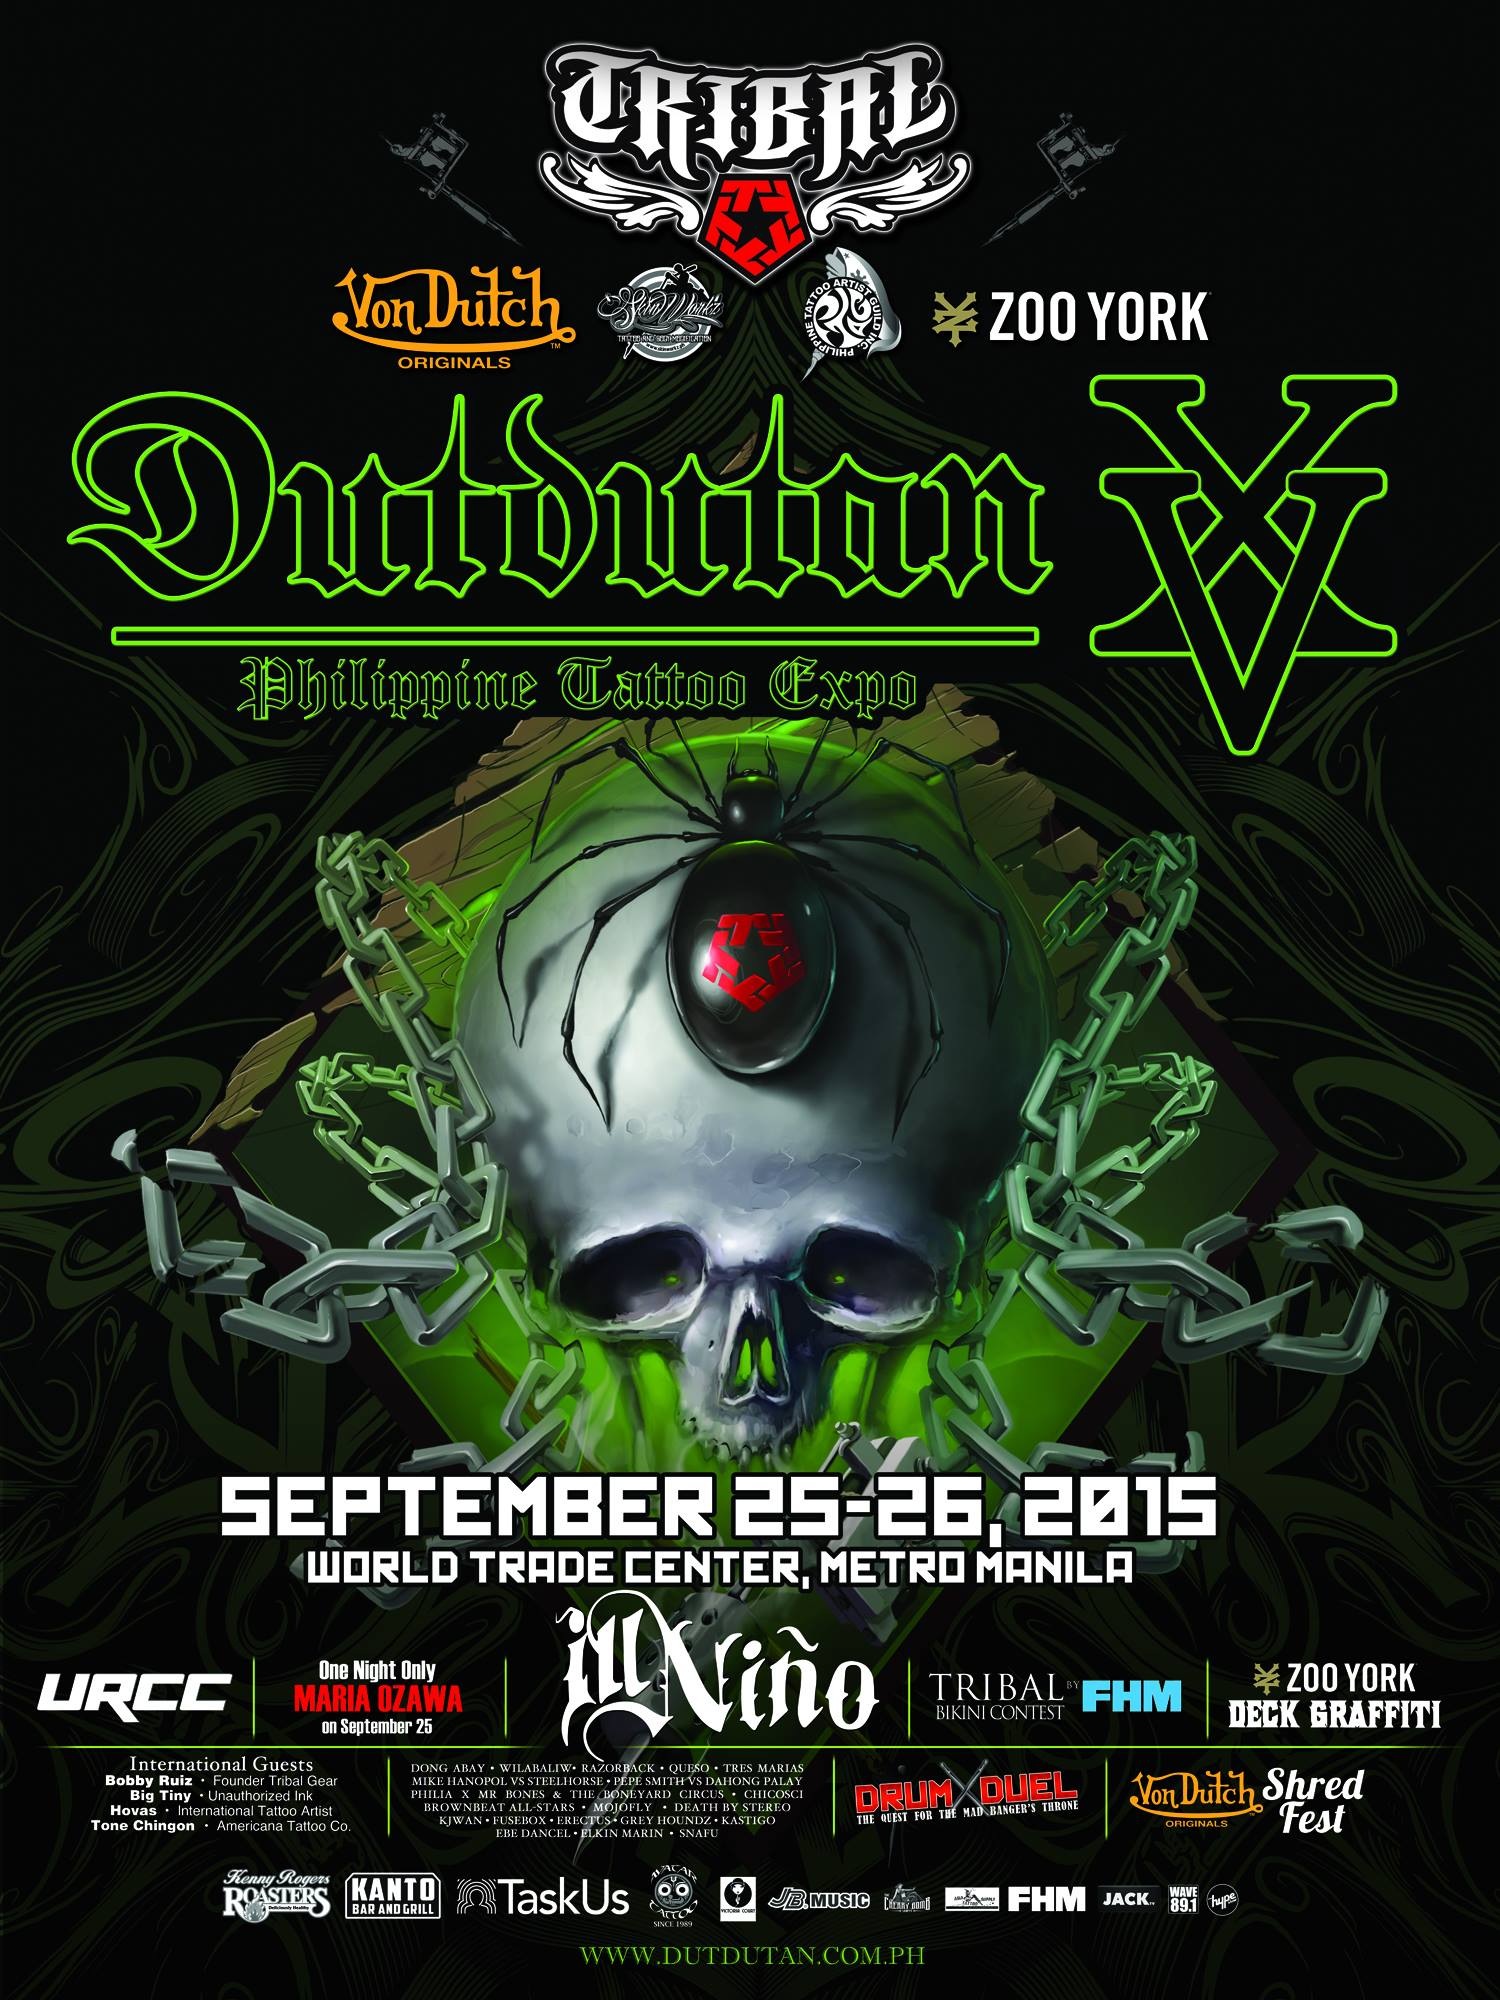 Dutdutan XV - September 25/26 at The World Trade Center. Are you ready to get INKED?!